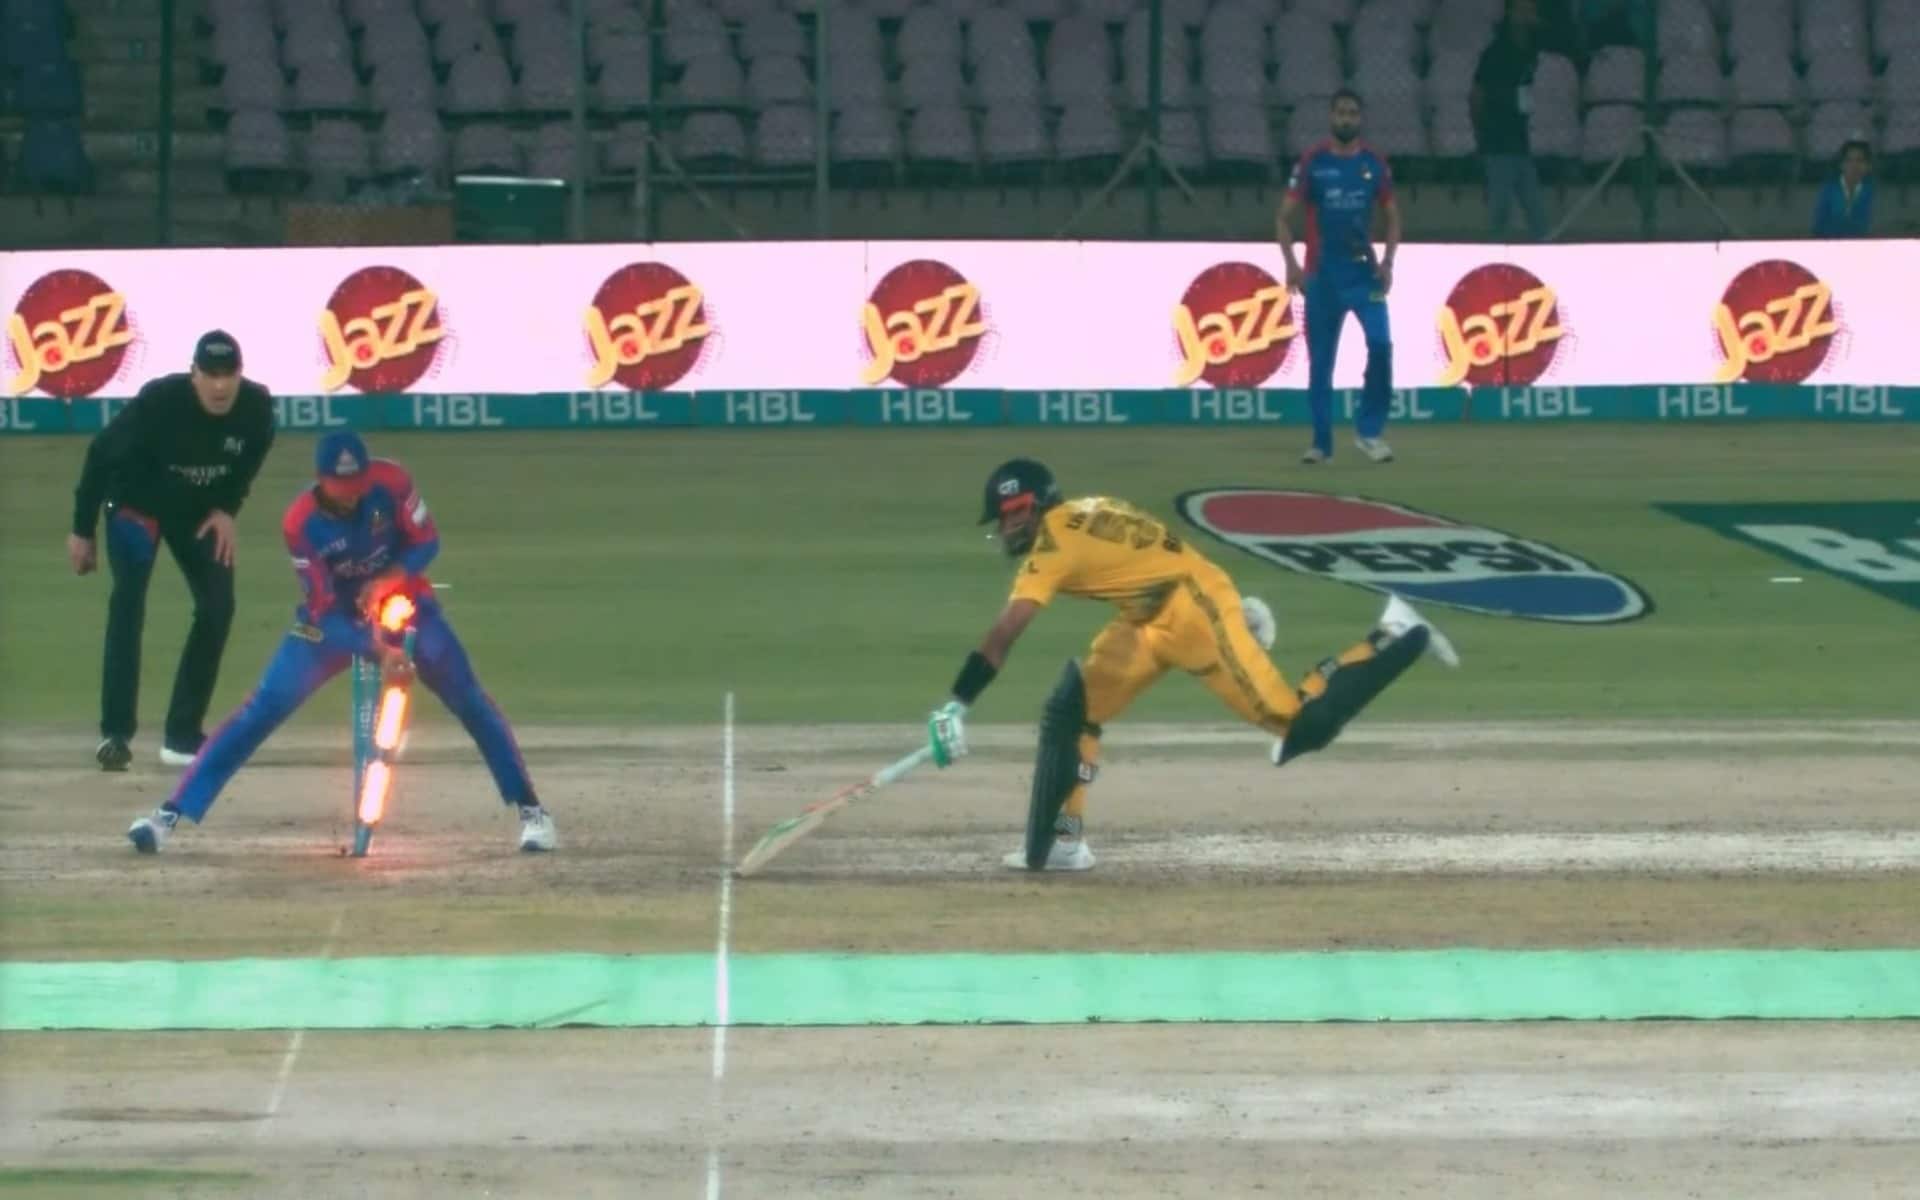 Babar Azam got run-out after getting to his fifty (Source: X.com)